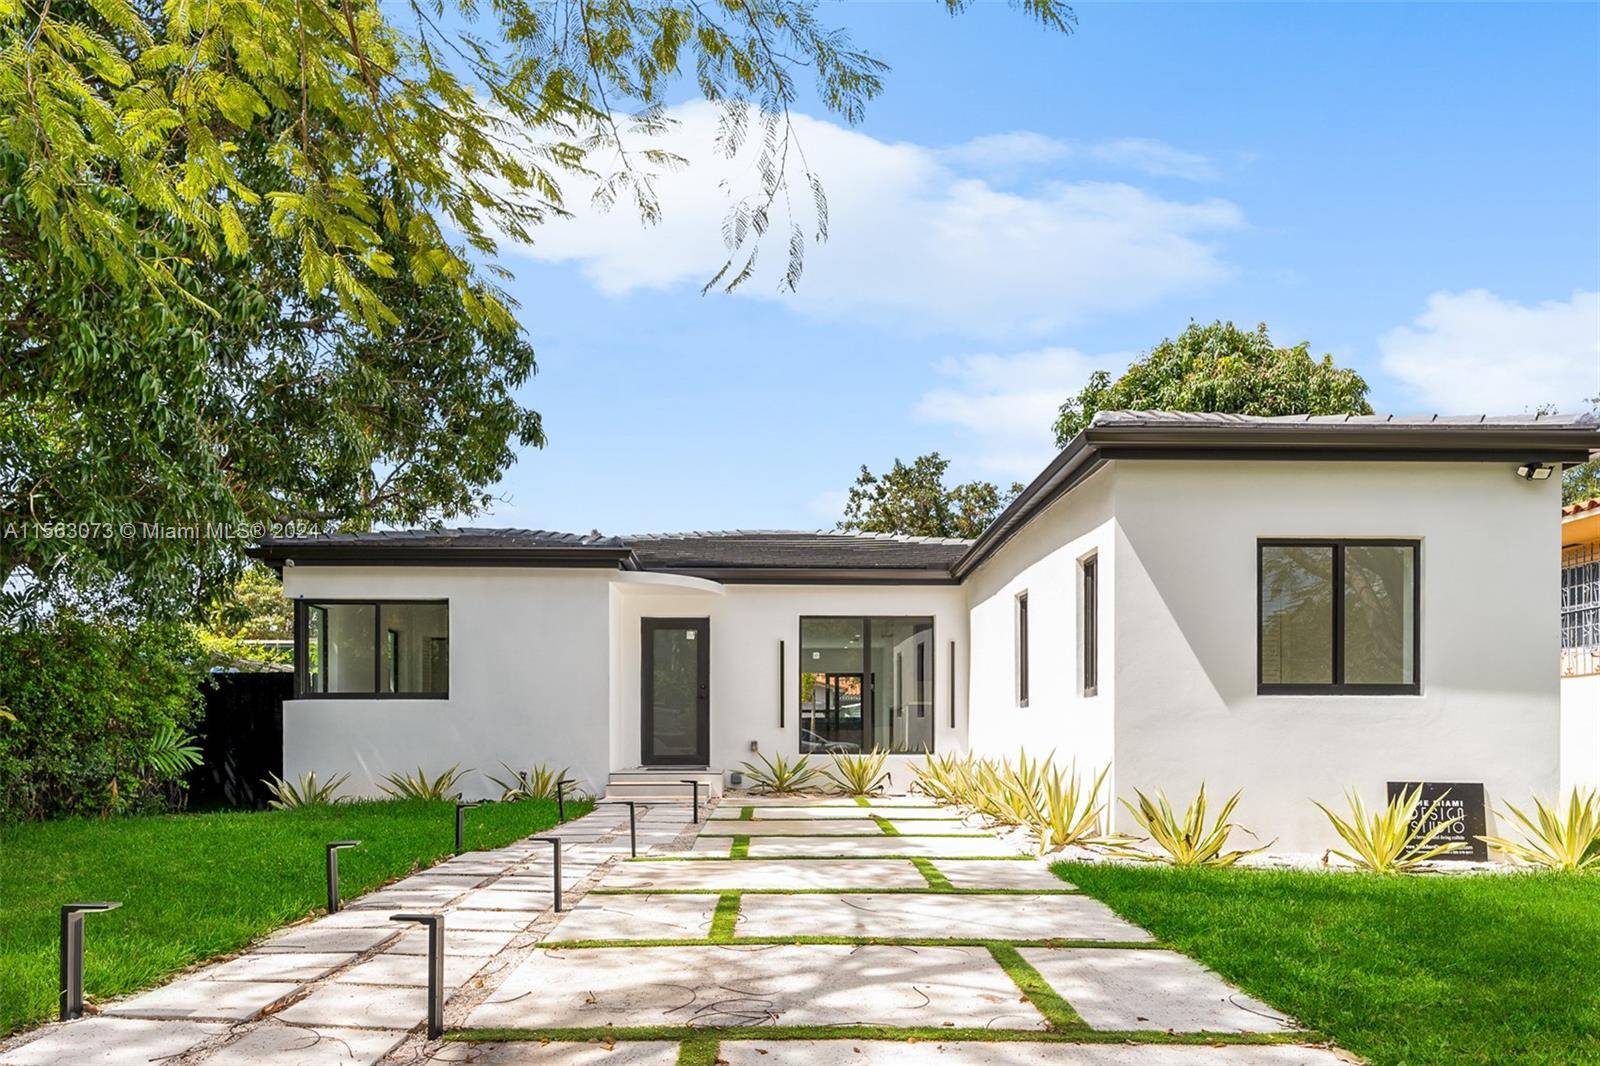 Welcome to your impeccably remodeled oasis in the coveted Roads neighborhood of Brickell !